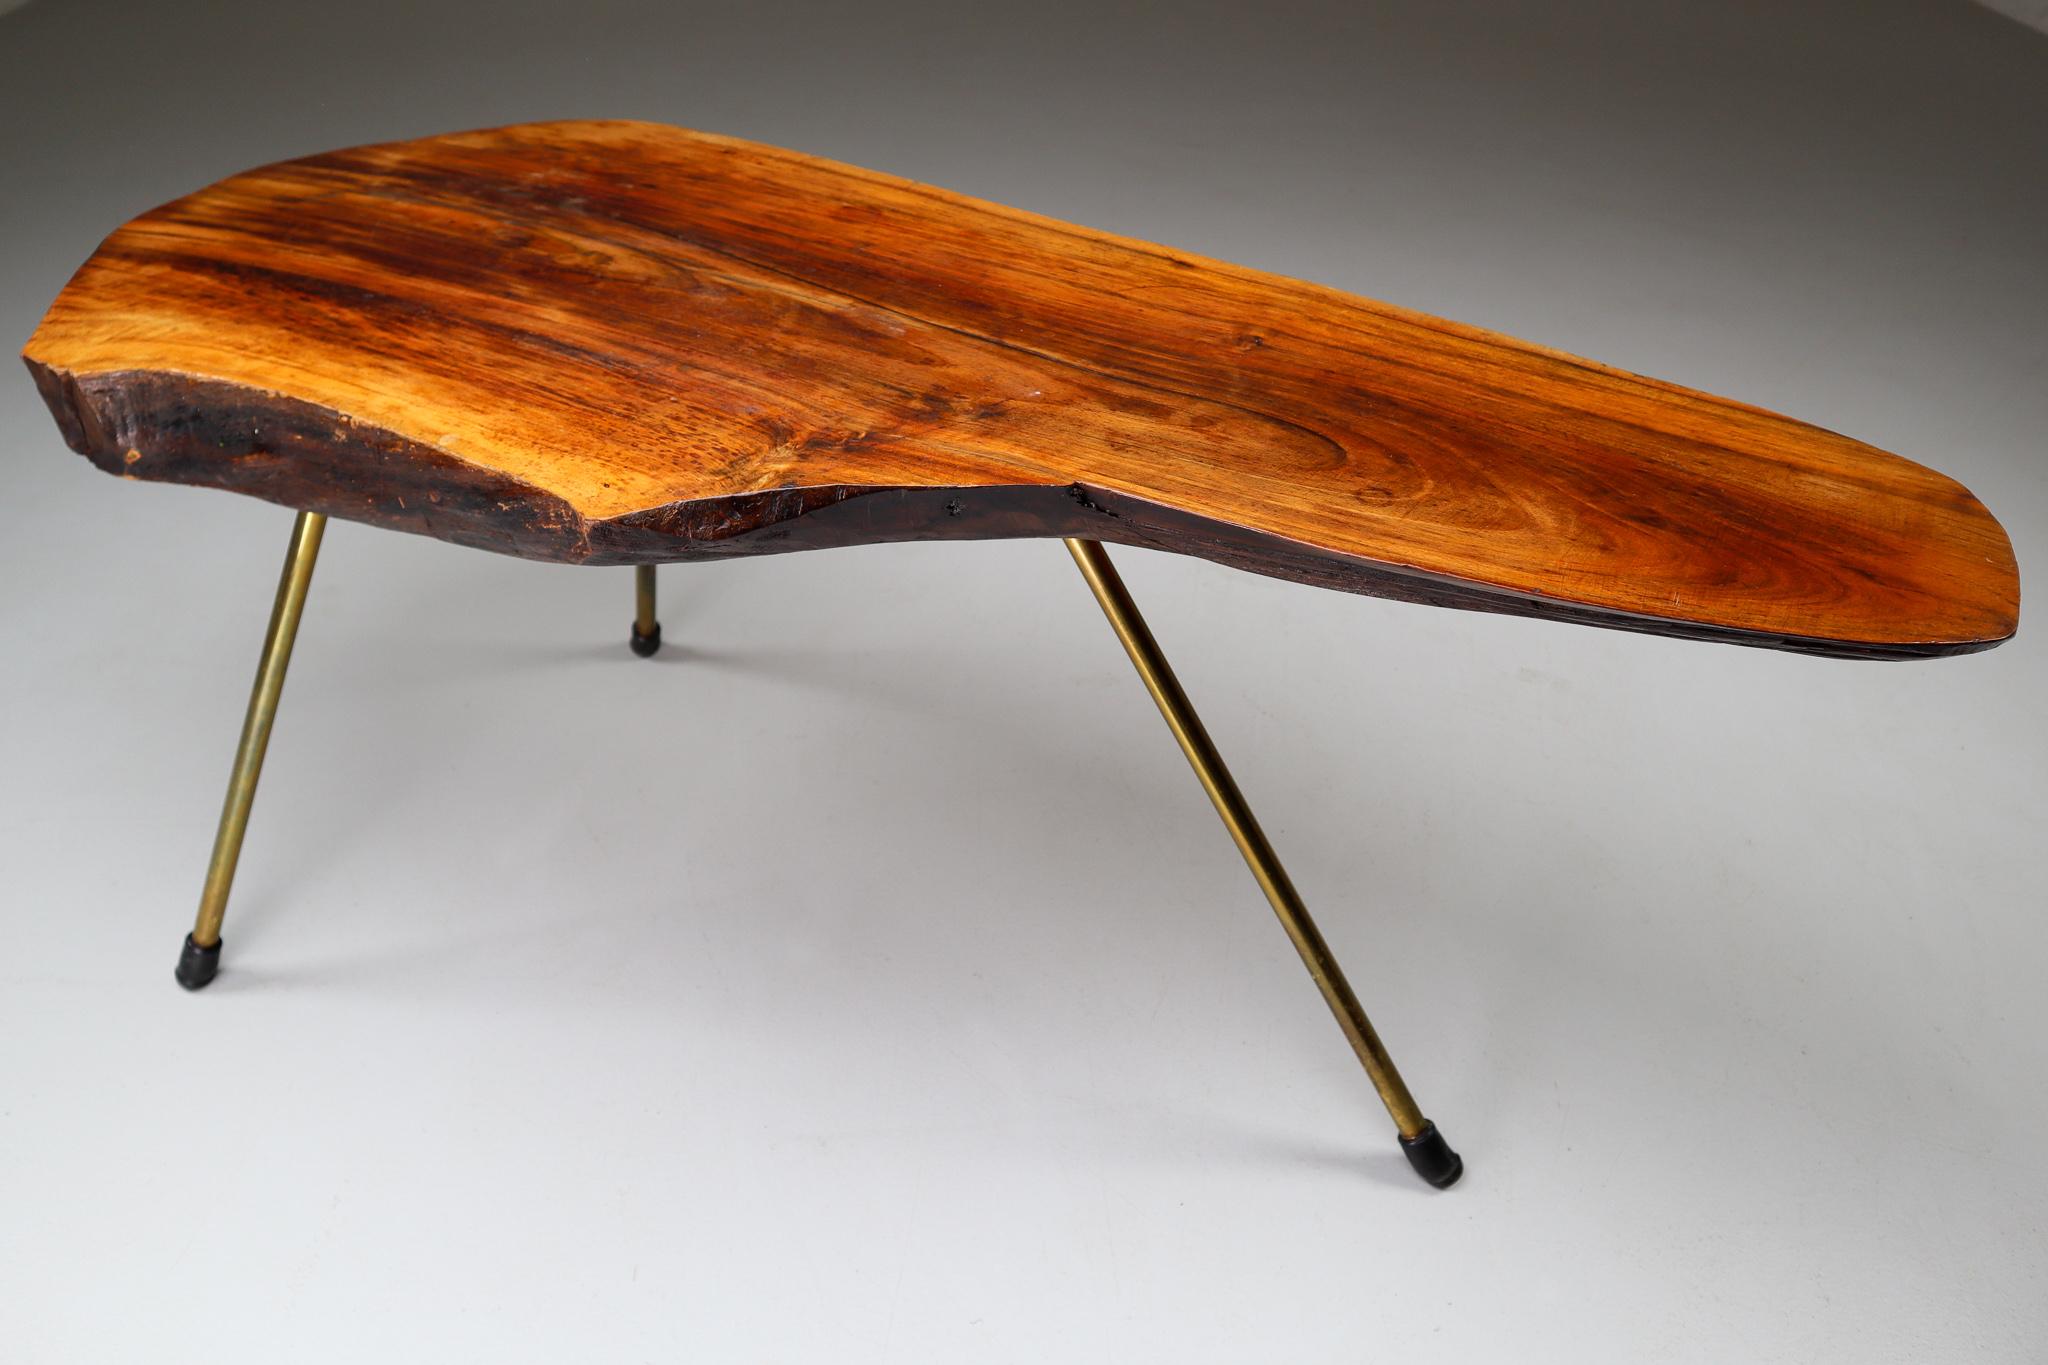 A large walnut tree trunk coffee table by Austrian designer Carl Auböck II (often simply referred to as Carl Auböck), from circa 1950s. A large tree trunk table designed and made by the Auböck Werkstätte, circa 1950s. The modernist table is made of